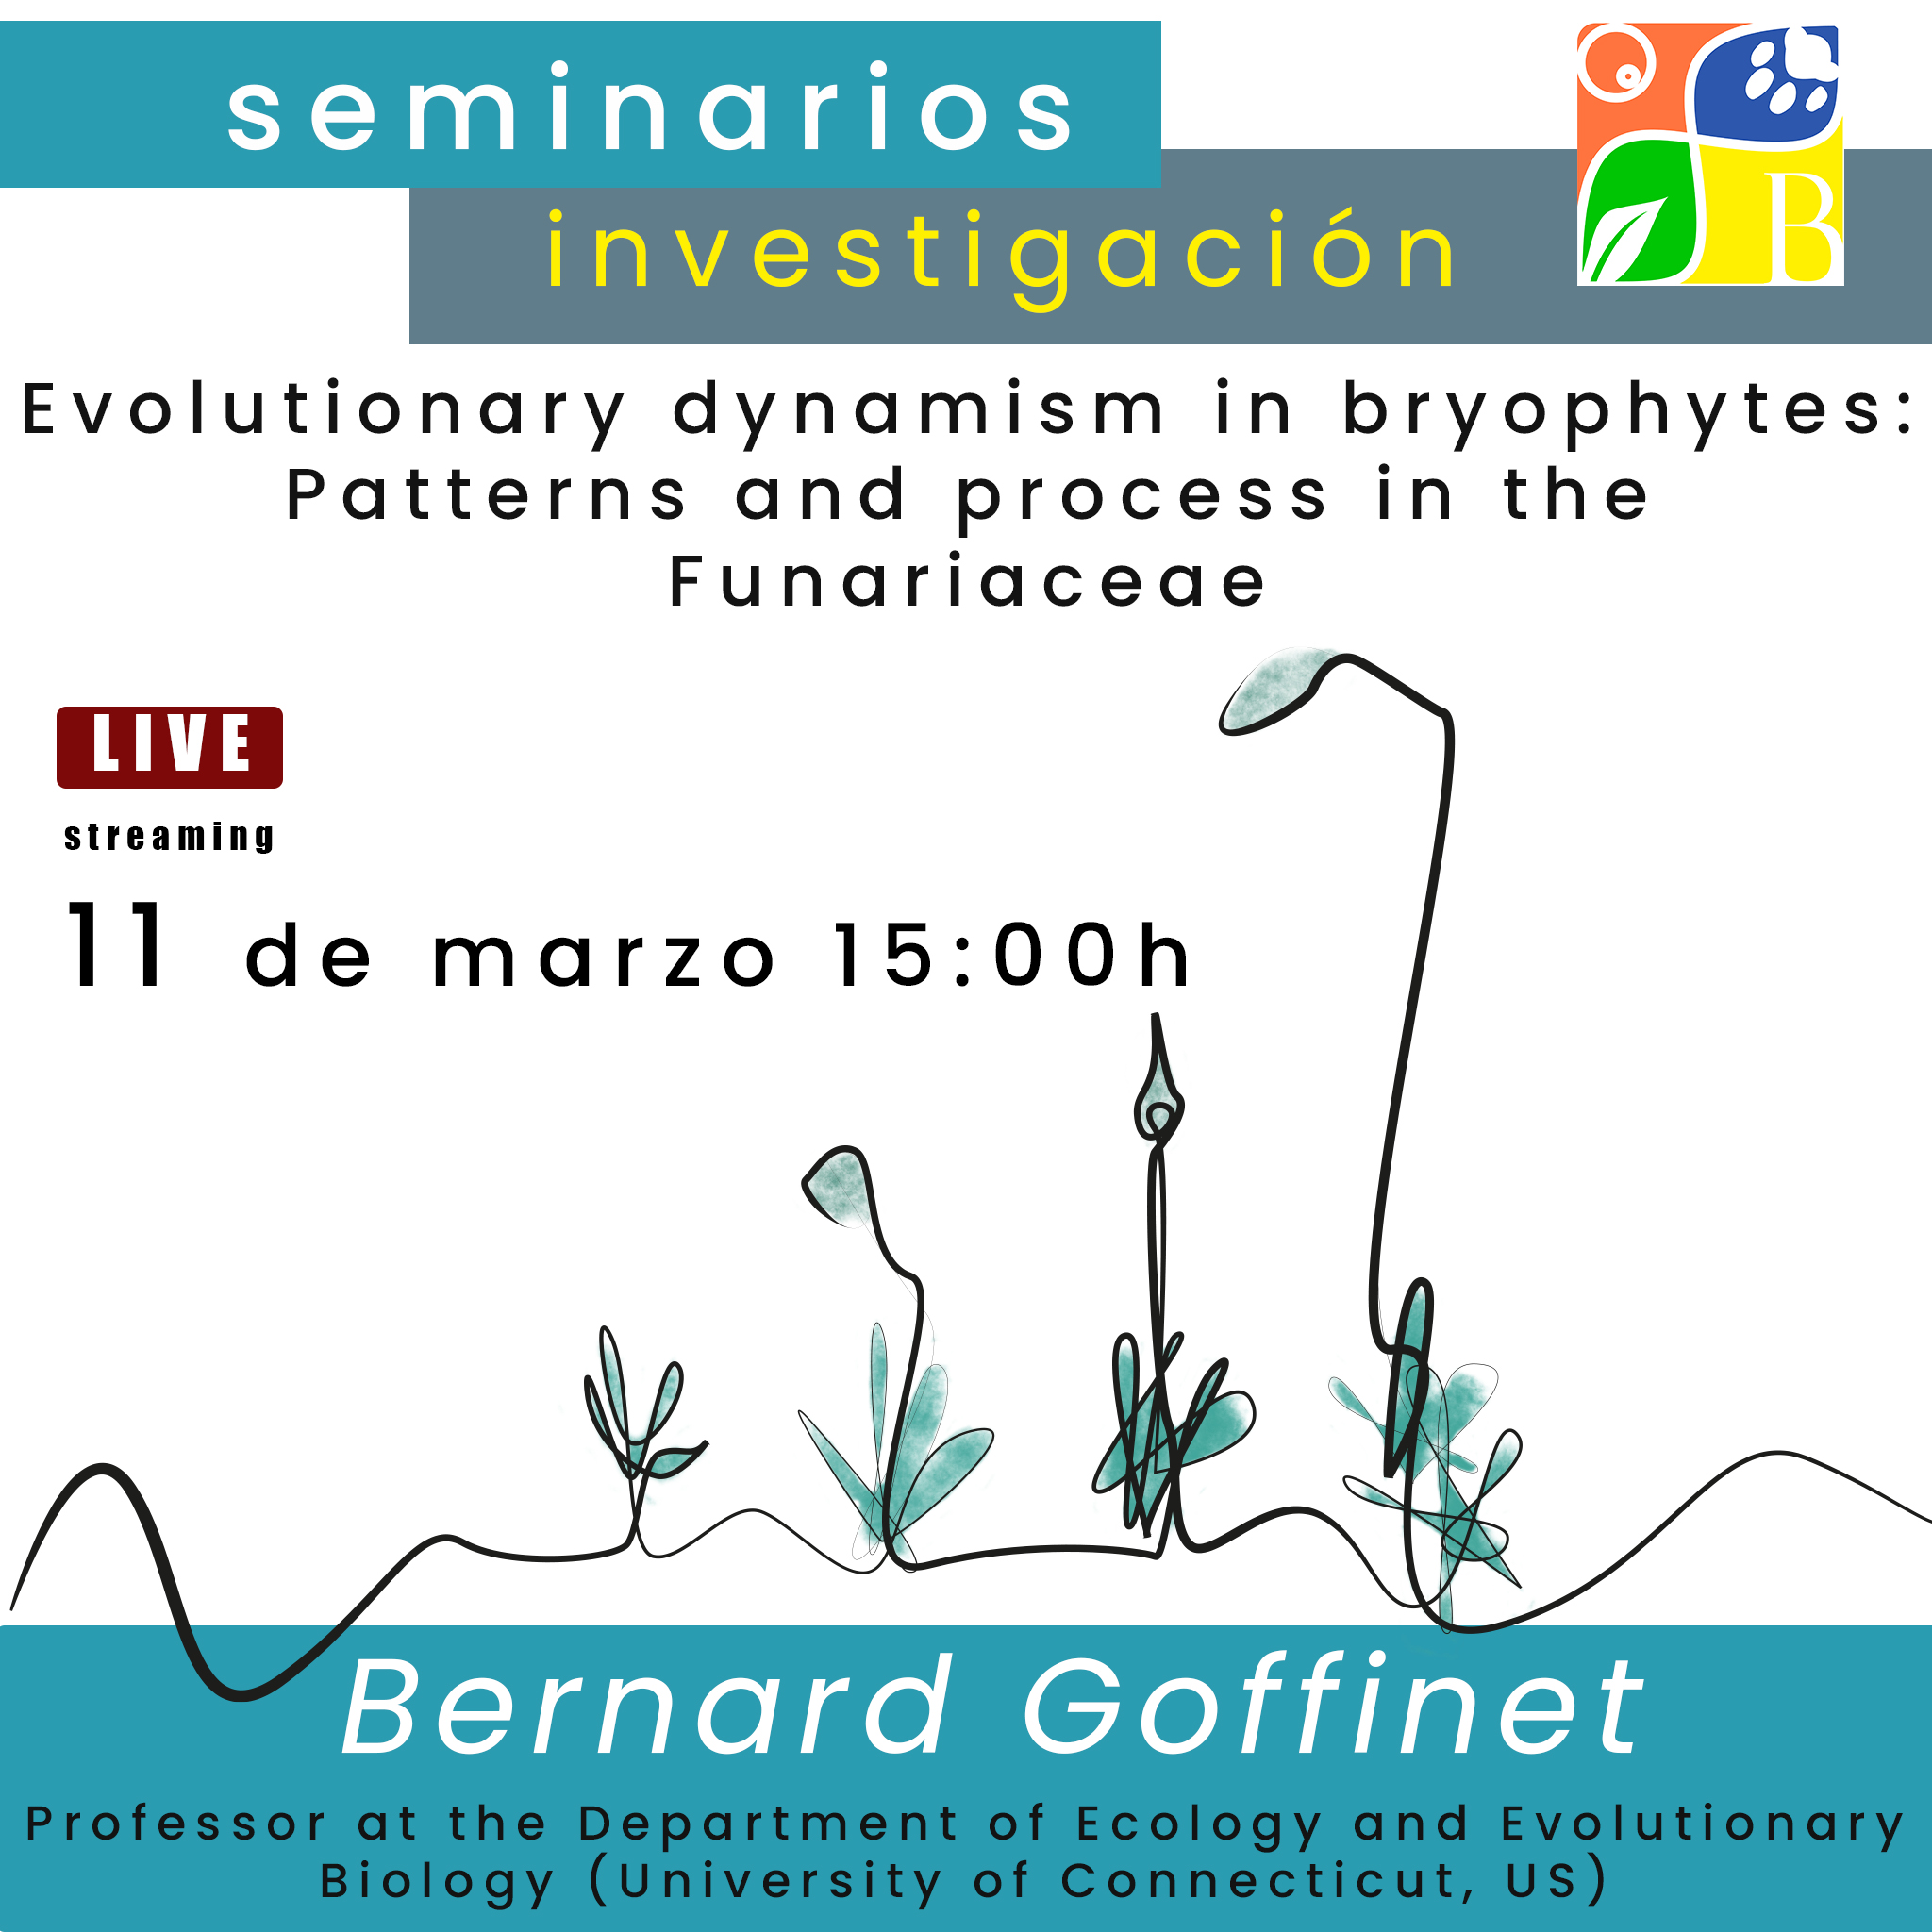 Conferencia «Evolutionary dynamism in bryophytes: Patterns and process in the Funariaceae» 11 de marzo - 1